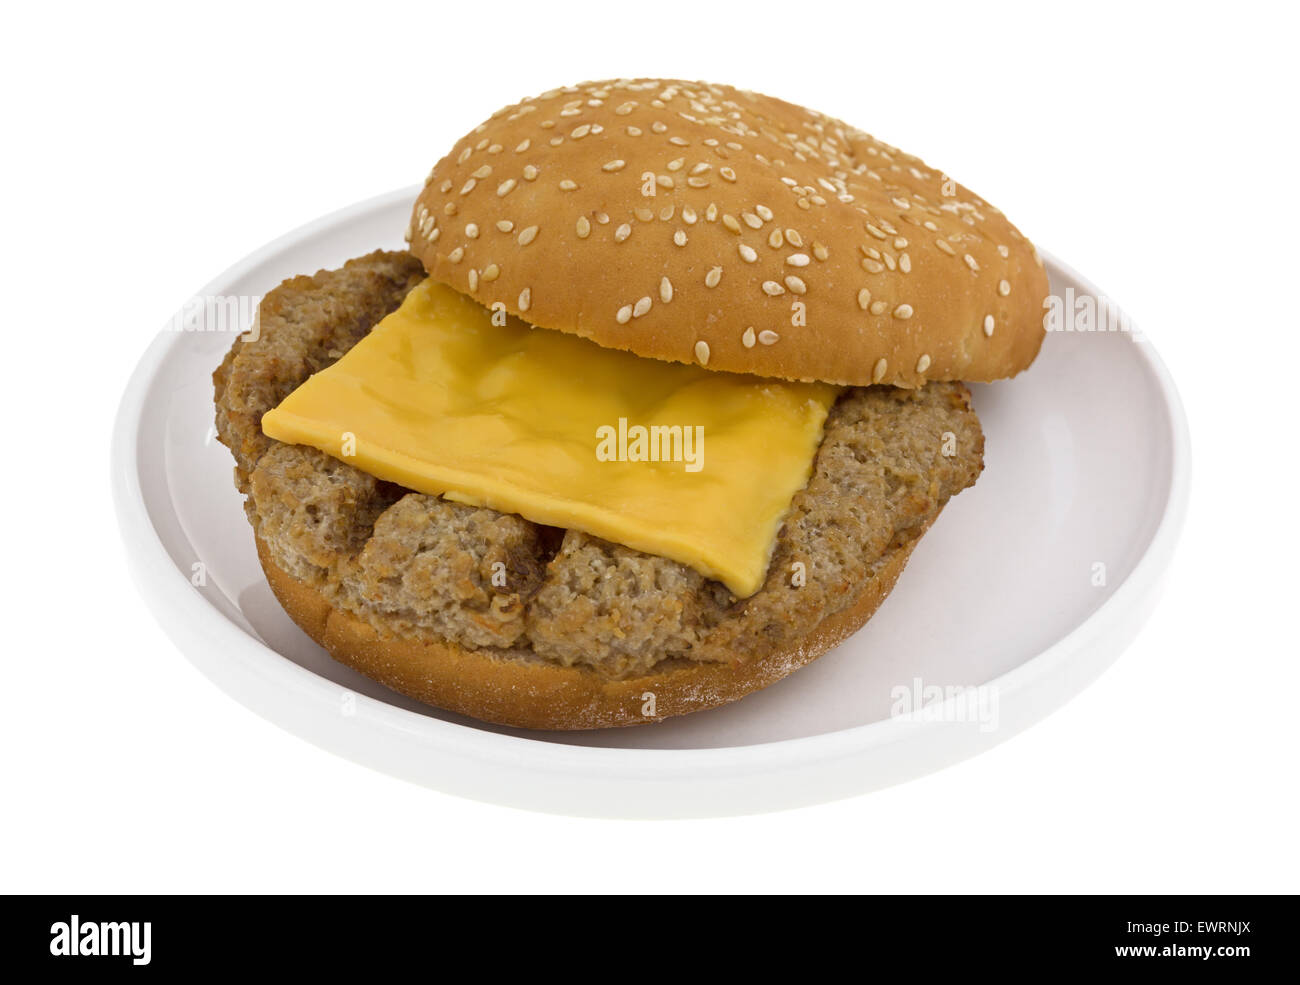 A microwaved cheeseburger on a small plate atop a white background. Stock Photo